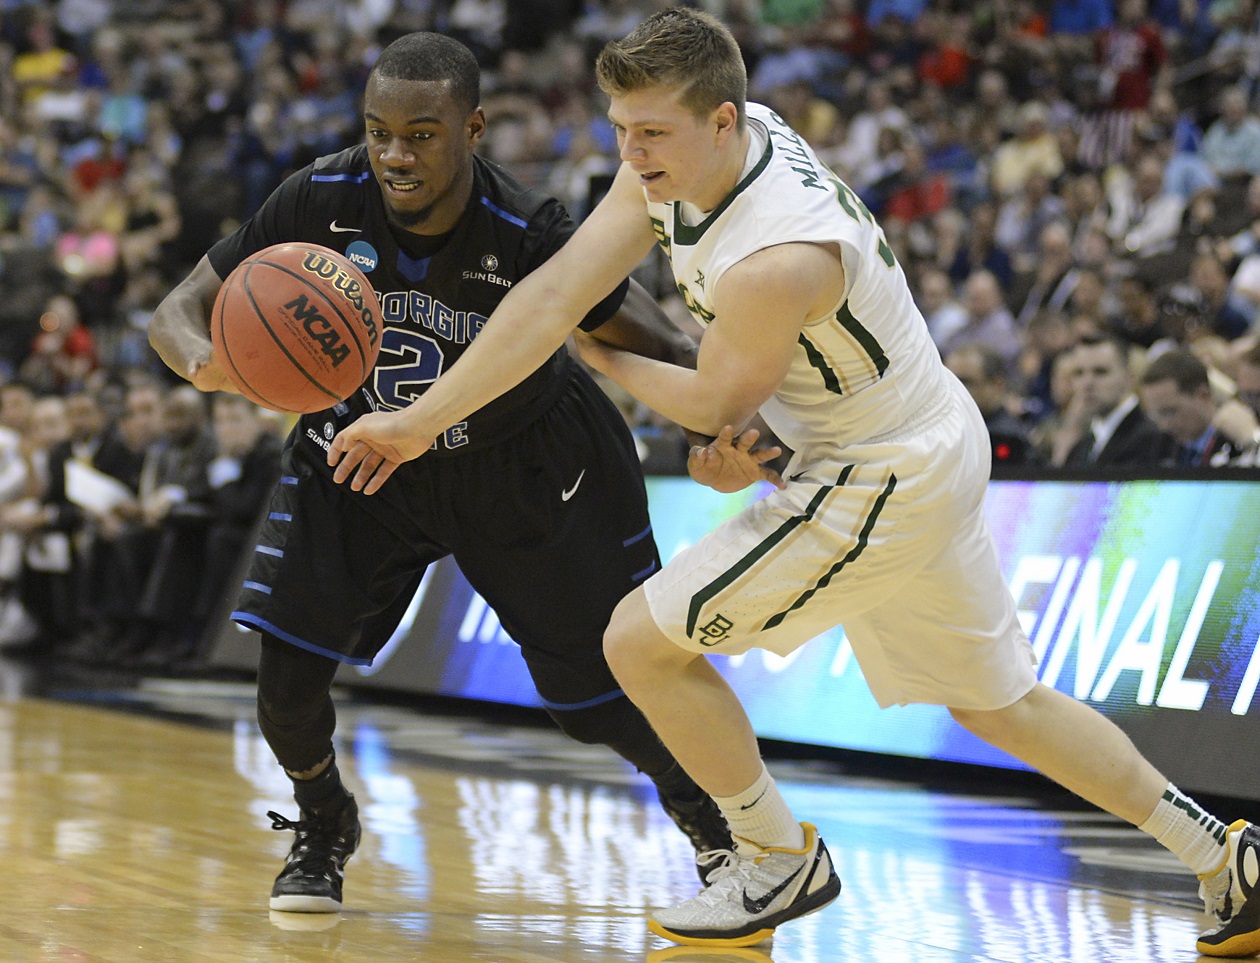 Georgia State guard Ryann Green, left, and Baylor guard Austin Mills, right, battle for the ball during the second half in the second round of the NCAA college basketball tournament, Thursday, March 19, 2015, in Jacksonville, Fla.  (AP Photo/Rick Wilson)